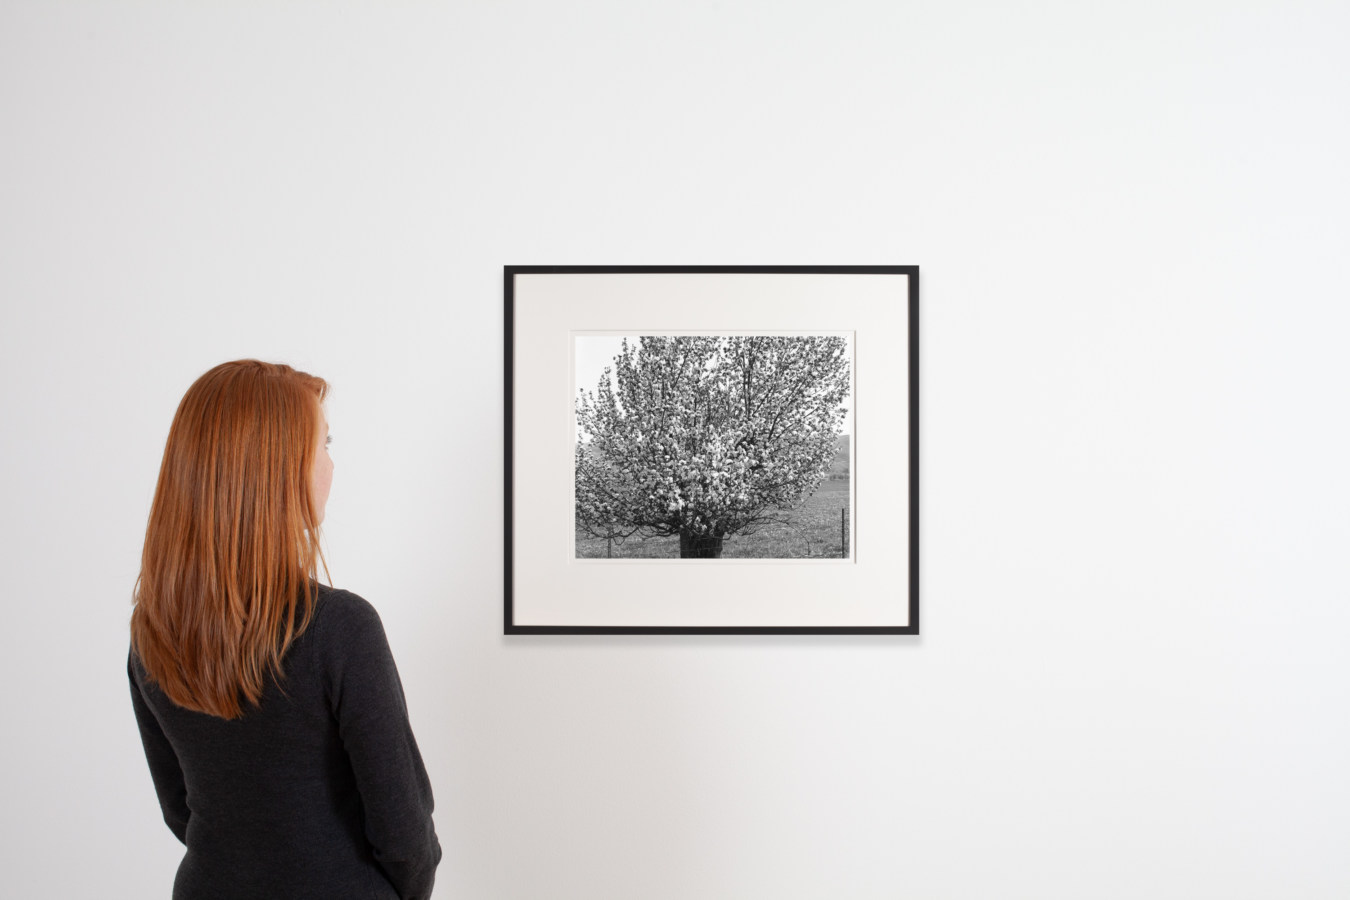 Color image of a person viewing black and white photograph on white wall